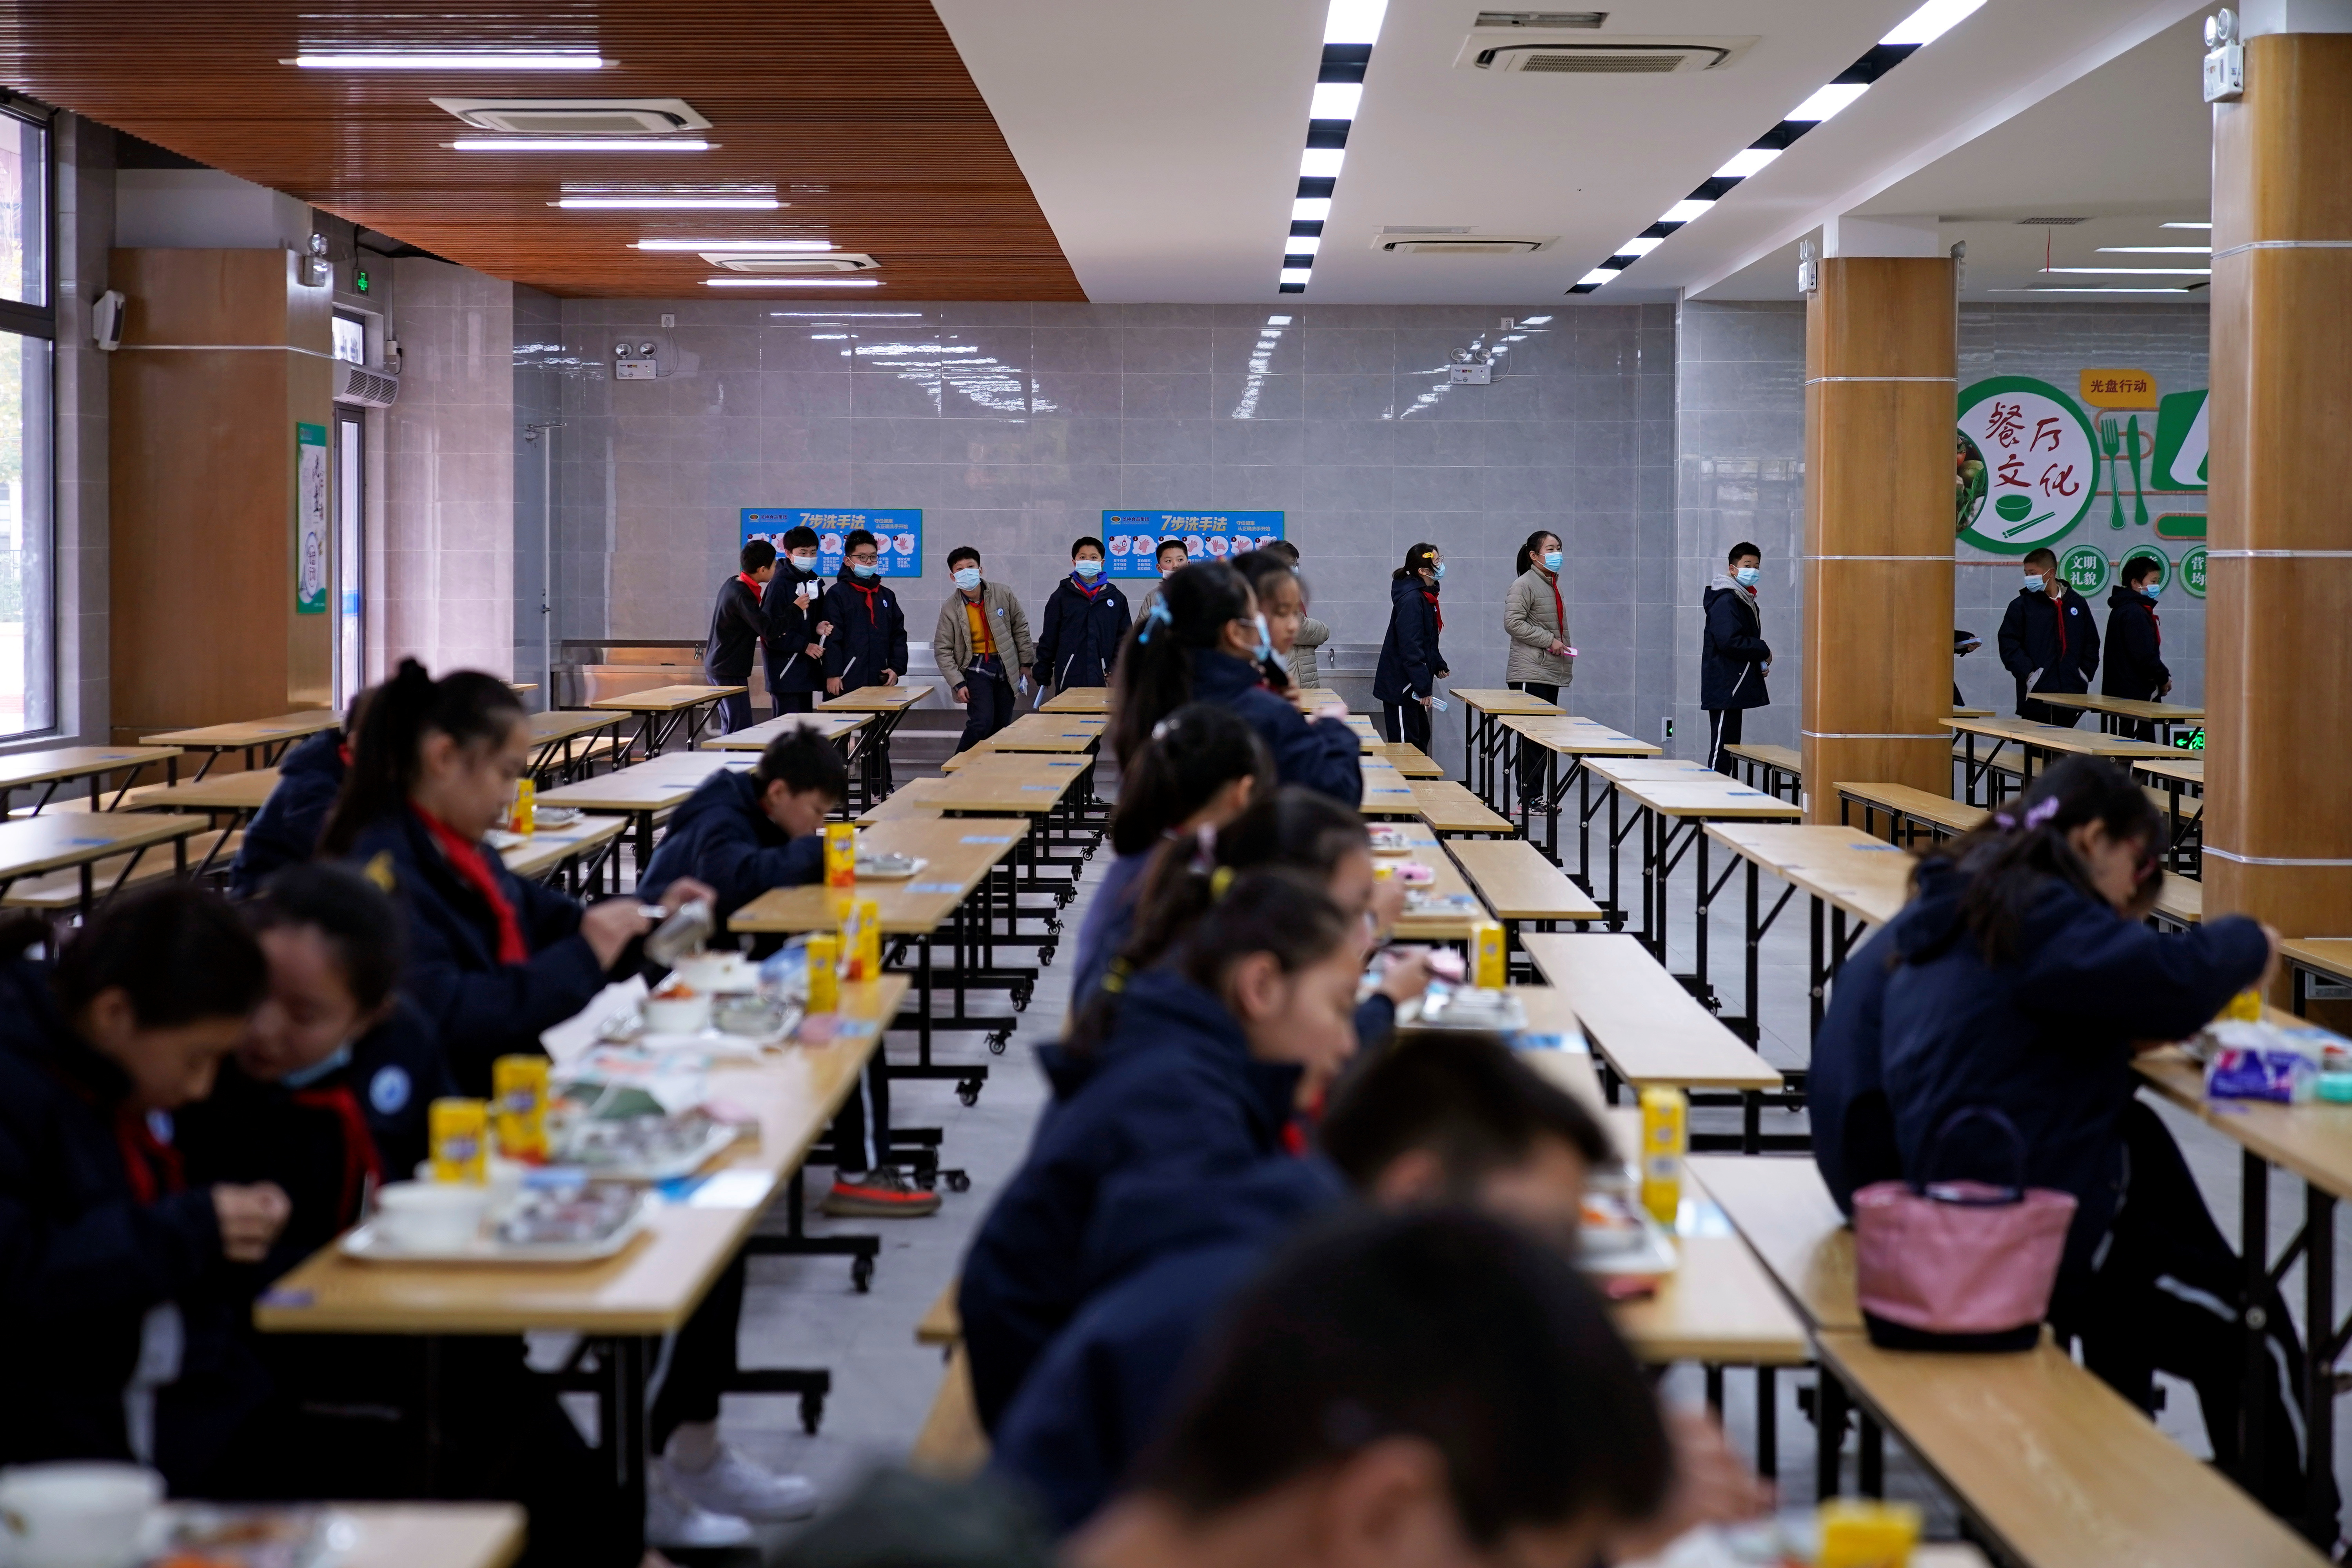 Students arrive at a restaurant for lunch at Minhang Experimental High School amid the global outbreak of the coronavirus disease (COVID-19) in Shanghai